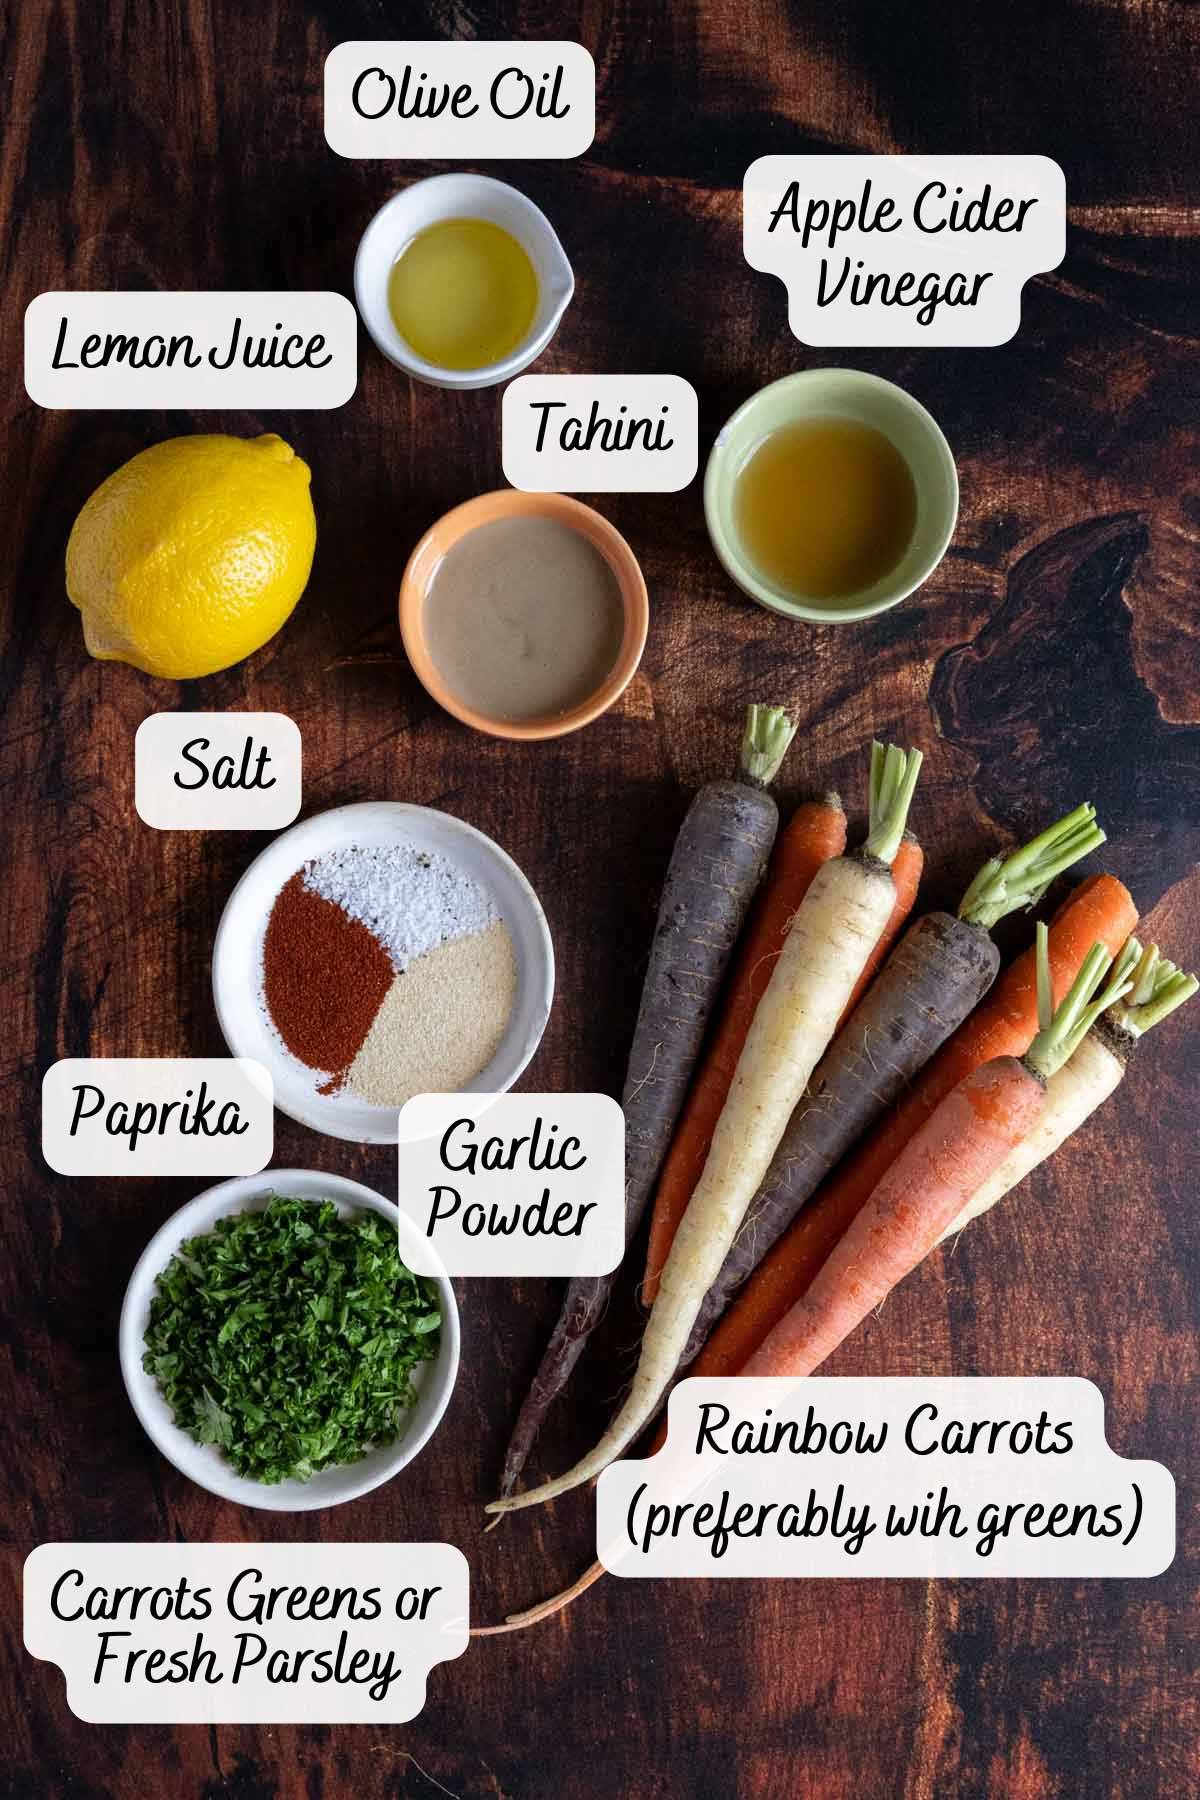 Recipe ingredients on a counter.